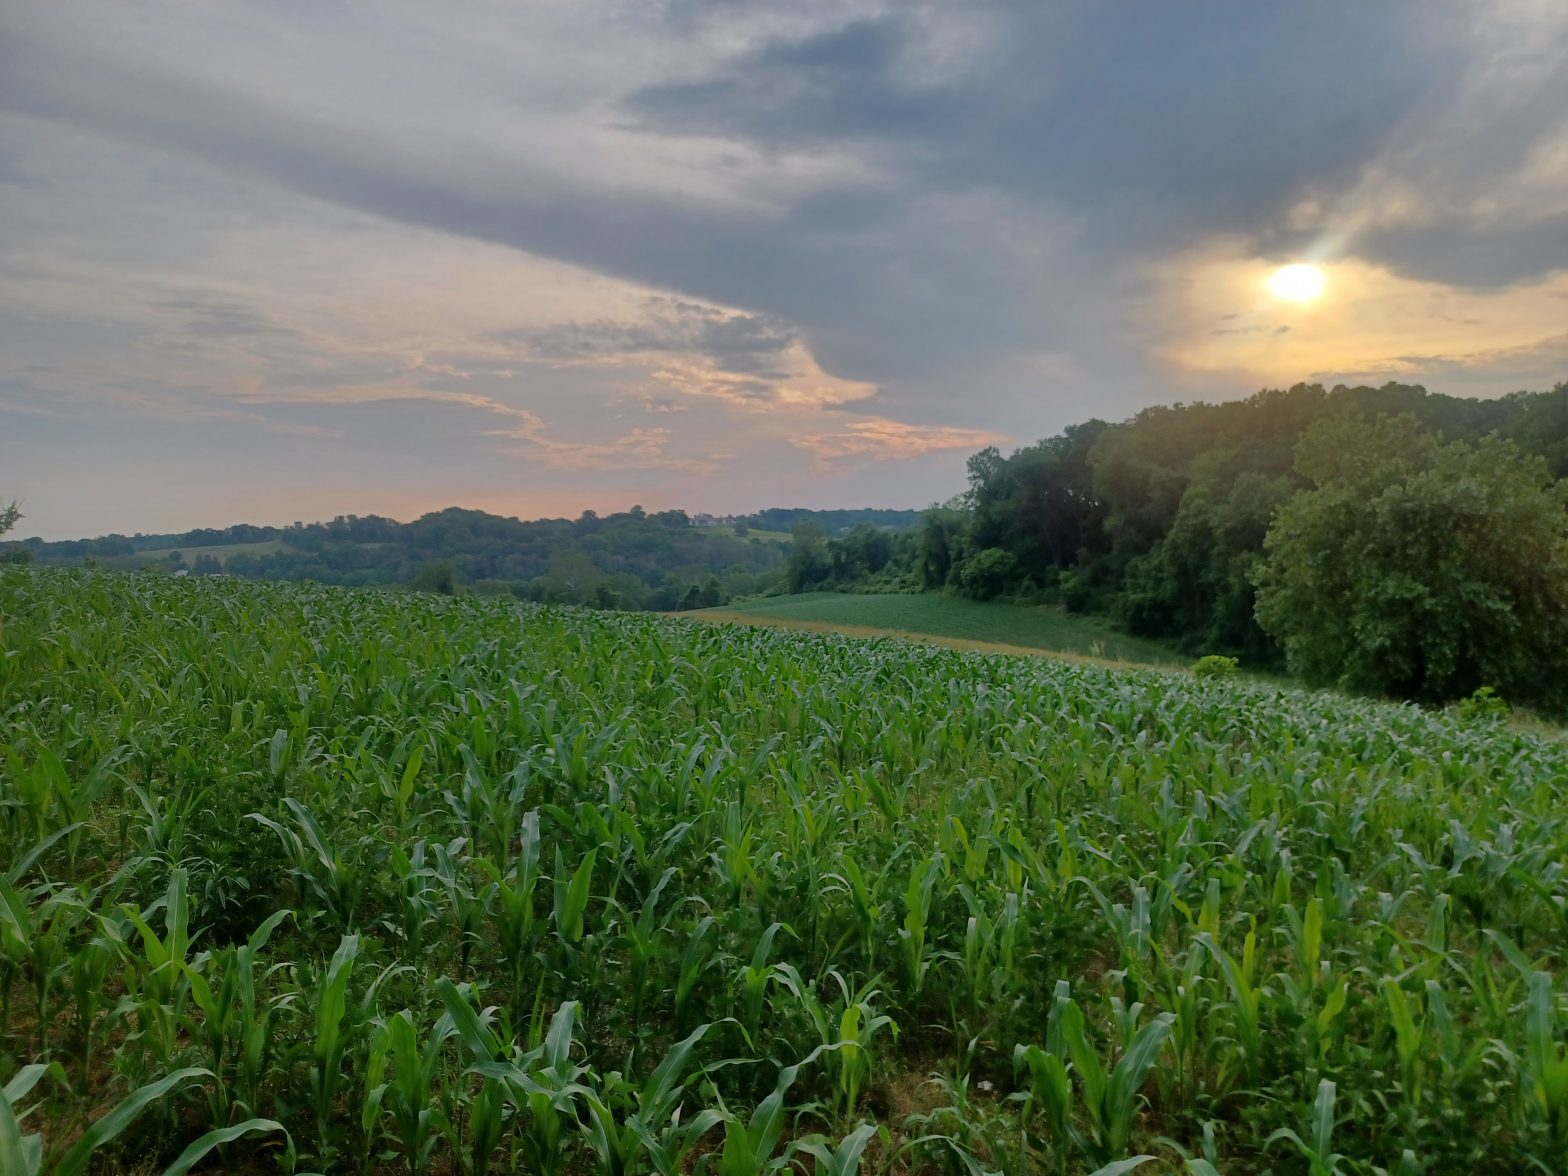 A sunset view of a field within First State National Historical Park's Brandywine Valley unit.